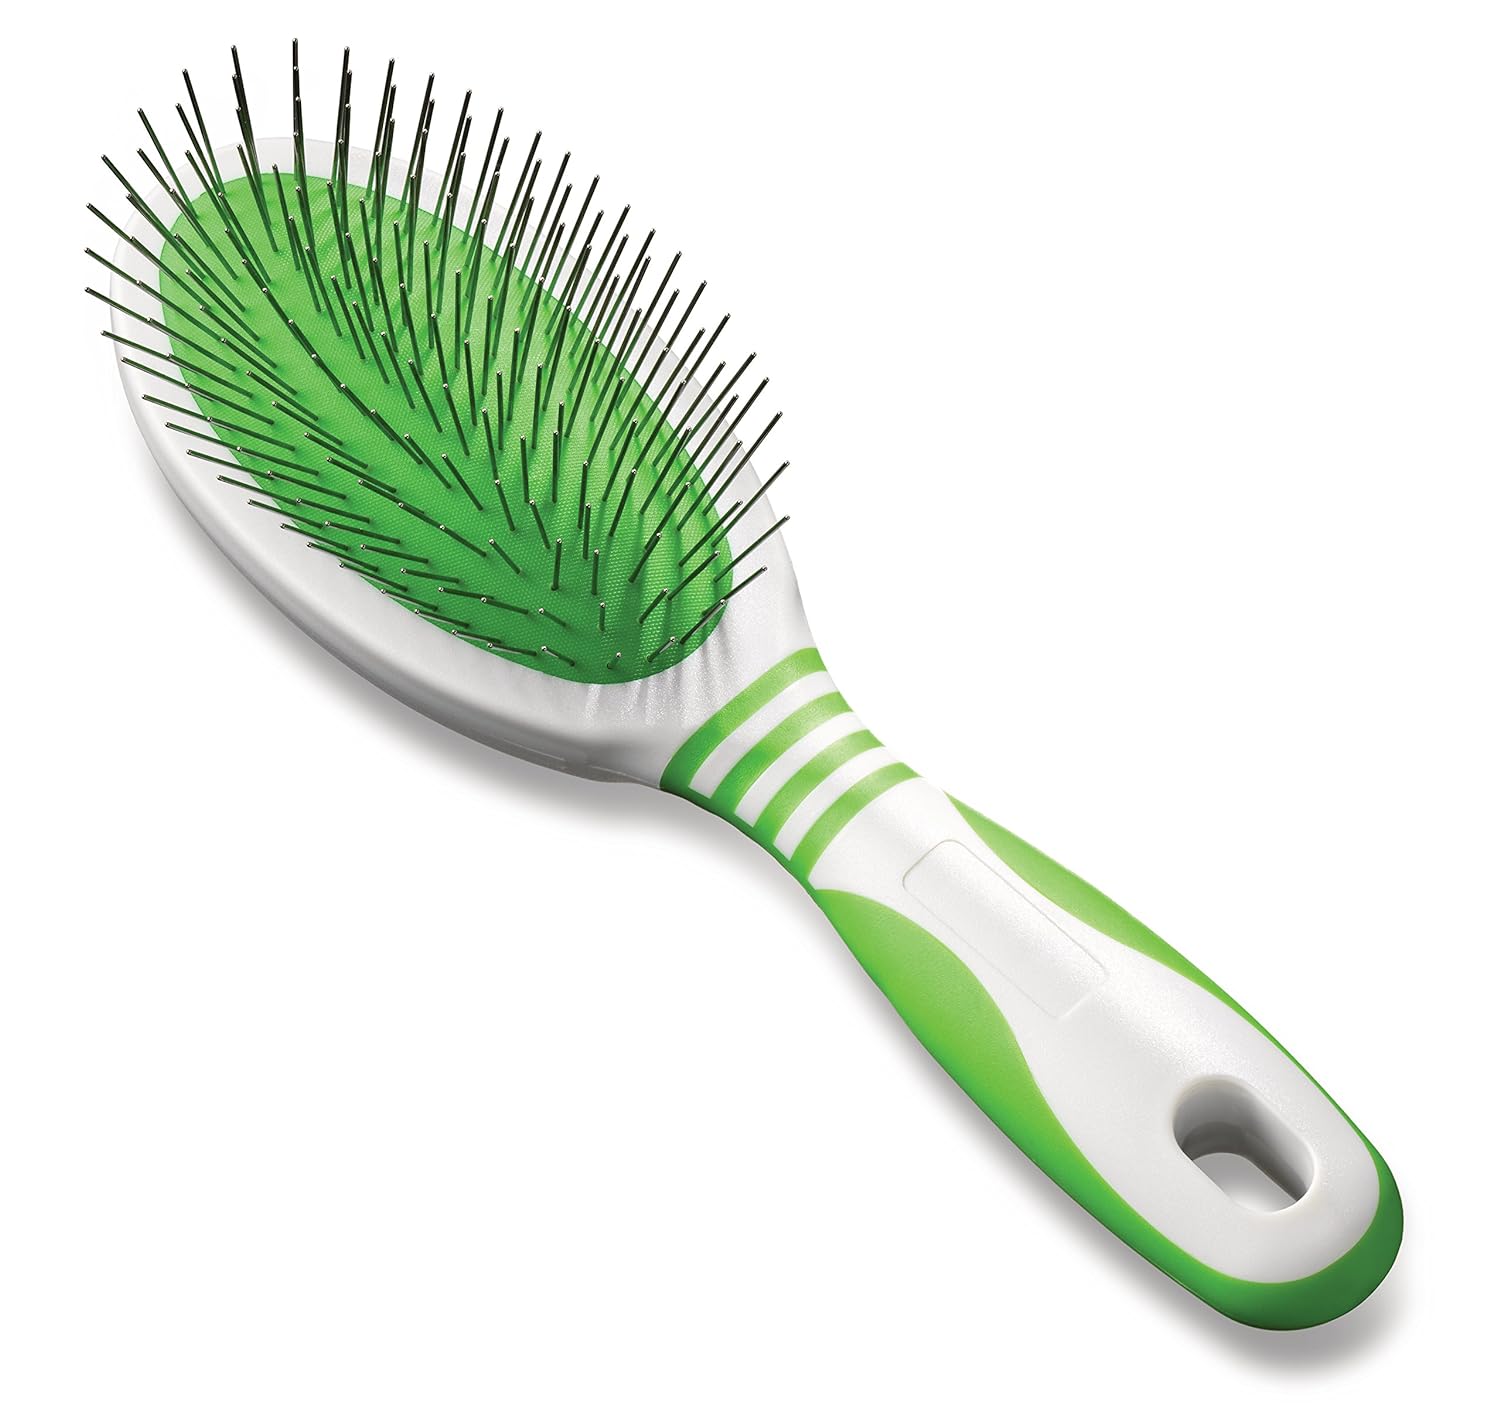 Andis 65720 Pin Brush for Medium & Long Hair Dogs - Gentle & Effective in Removing Dirt, Dust & Loose Hair - Promotes Healthy Skin & Coat - Large, Green/White : Beauty & Personal Care